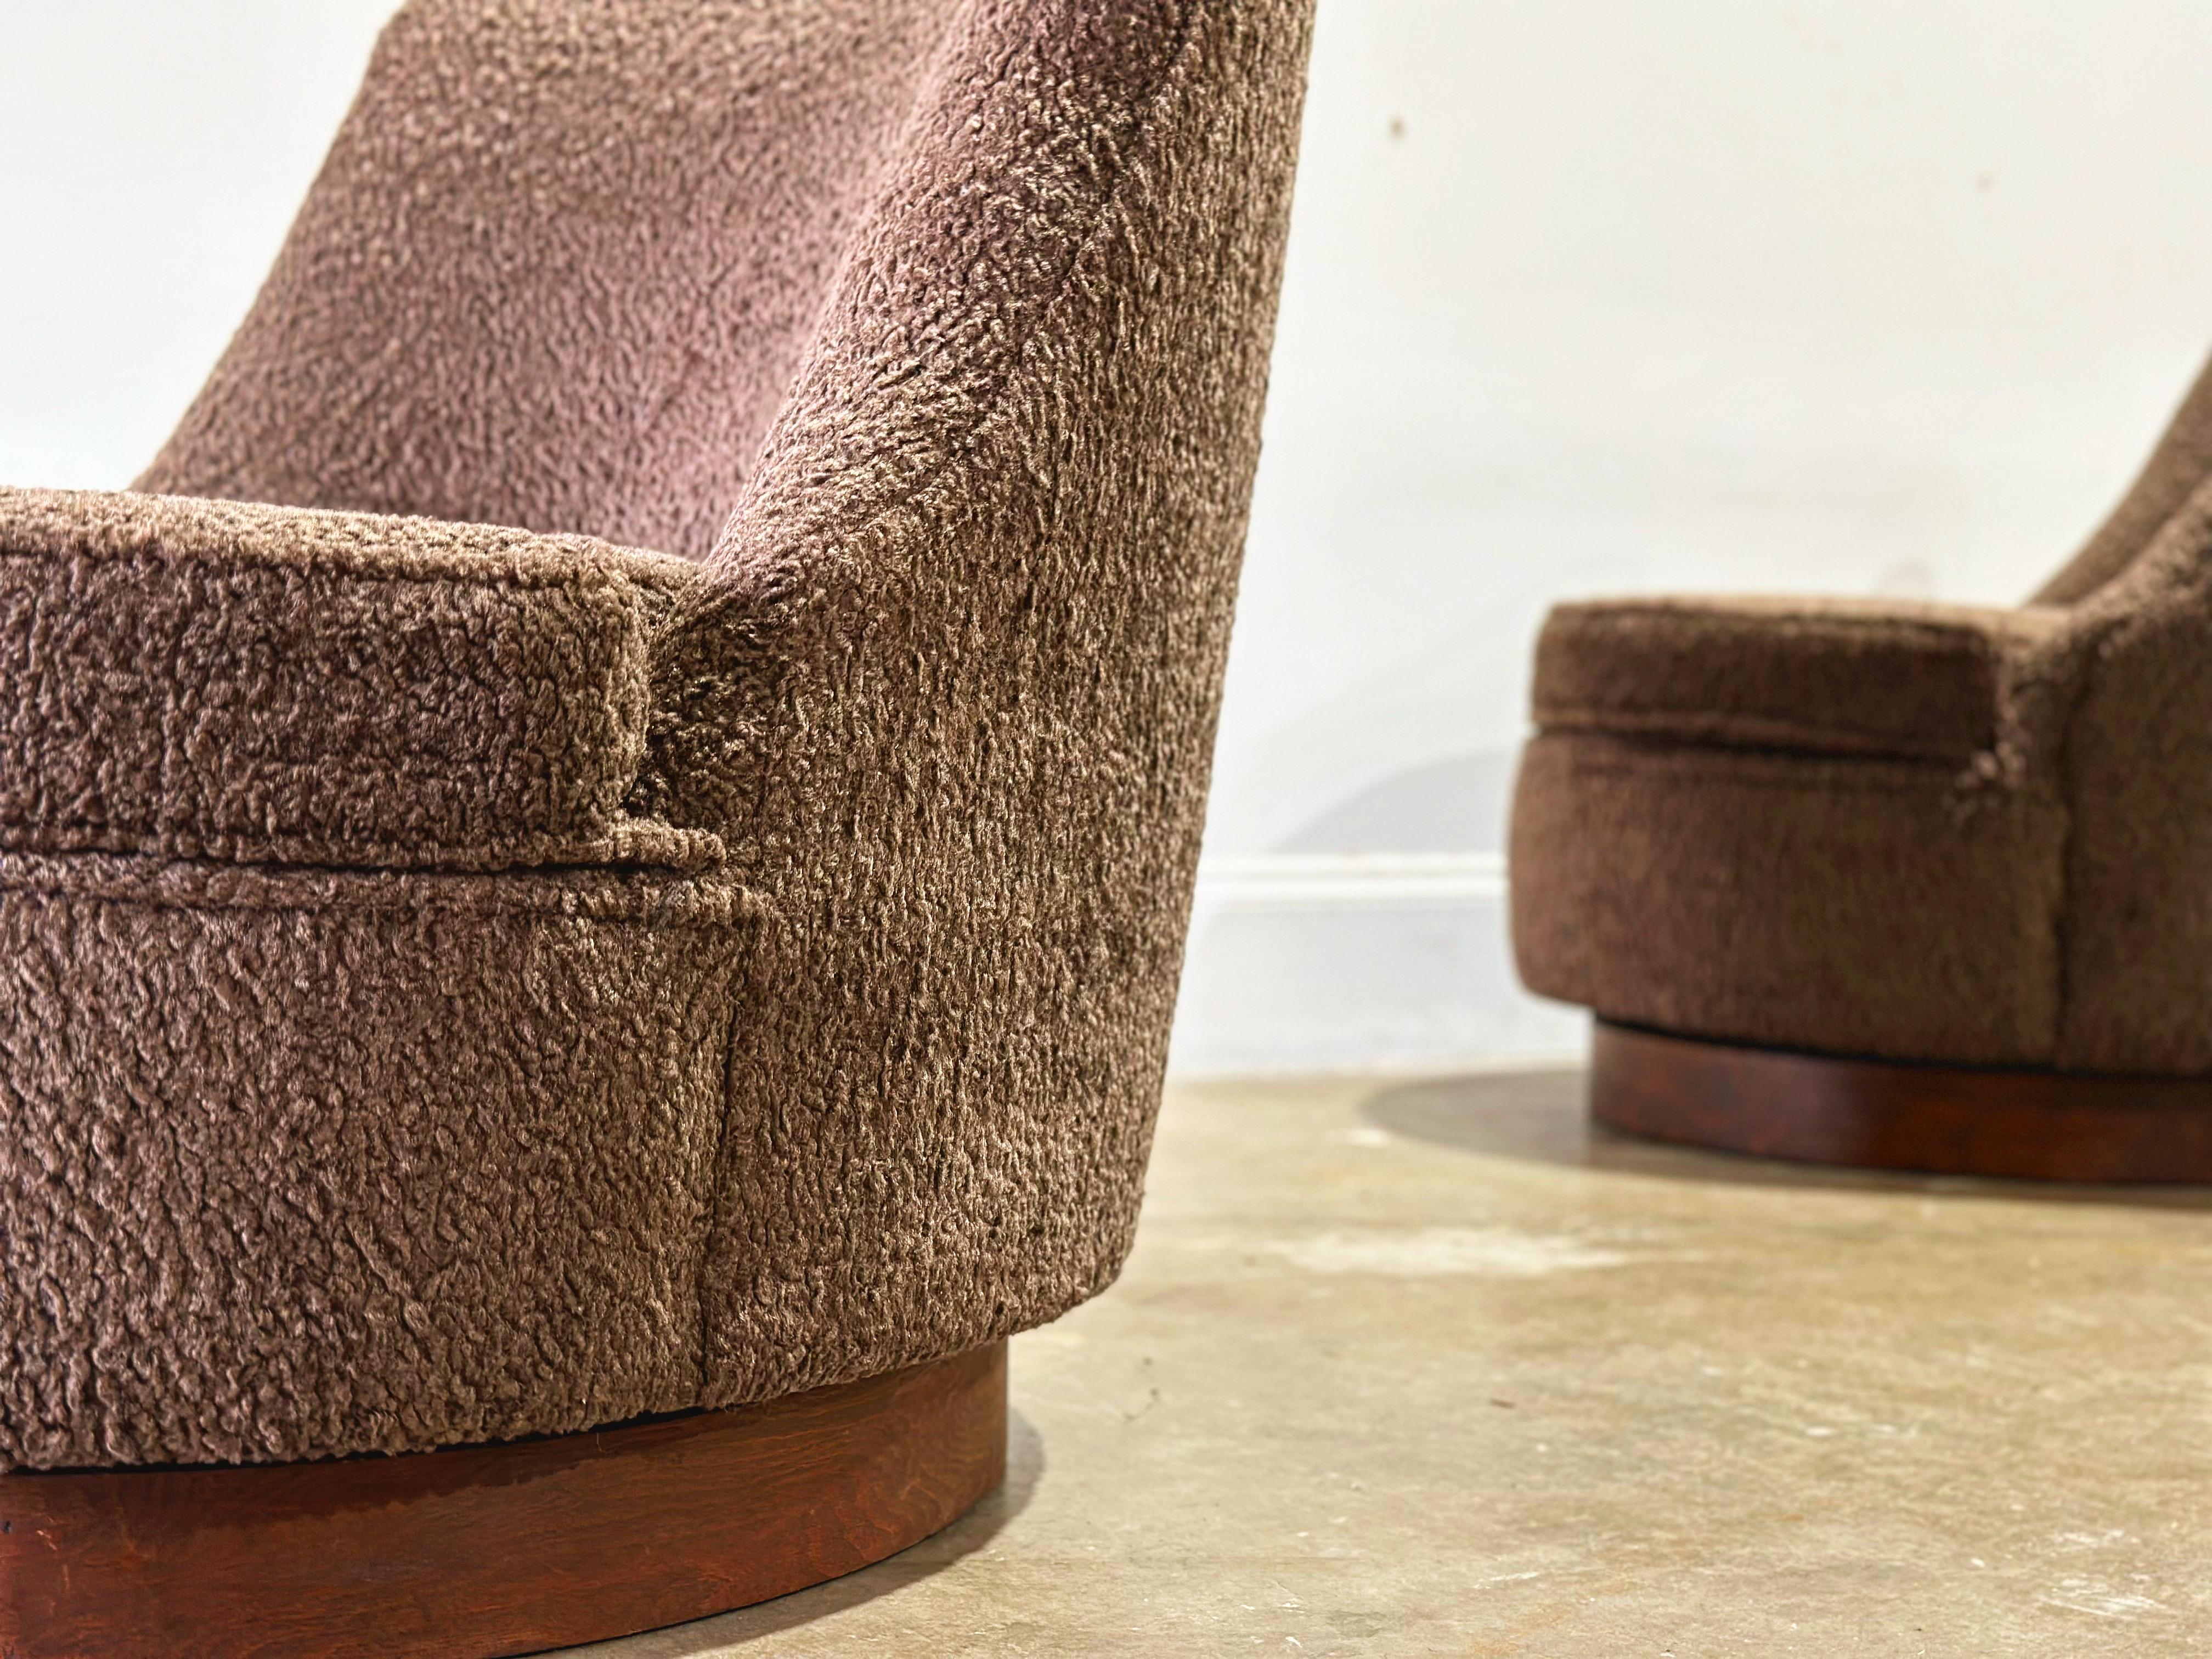 Pair of stunning Mid-Century Modern swivel slipper style barrel chairs with walnut plinth bases by Harvey Probber. Ultra soft sherpa boucle in a warm chocolatey brown - kind of like sitting in a giant teddy bear! 
All new foam, strapping and